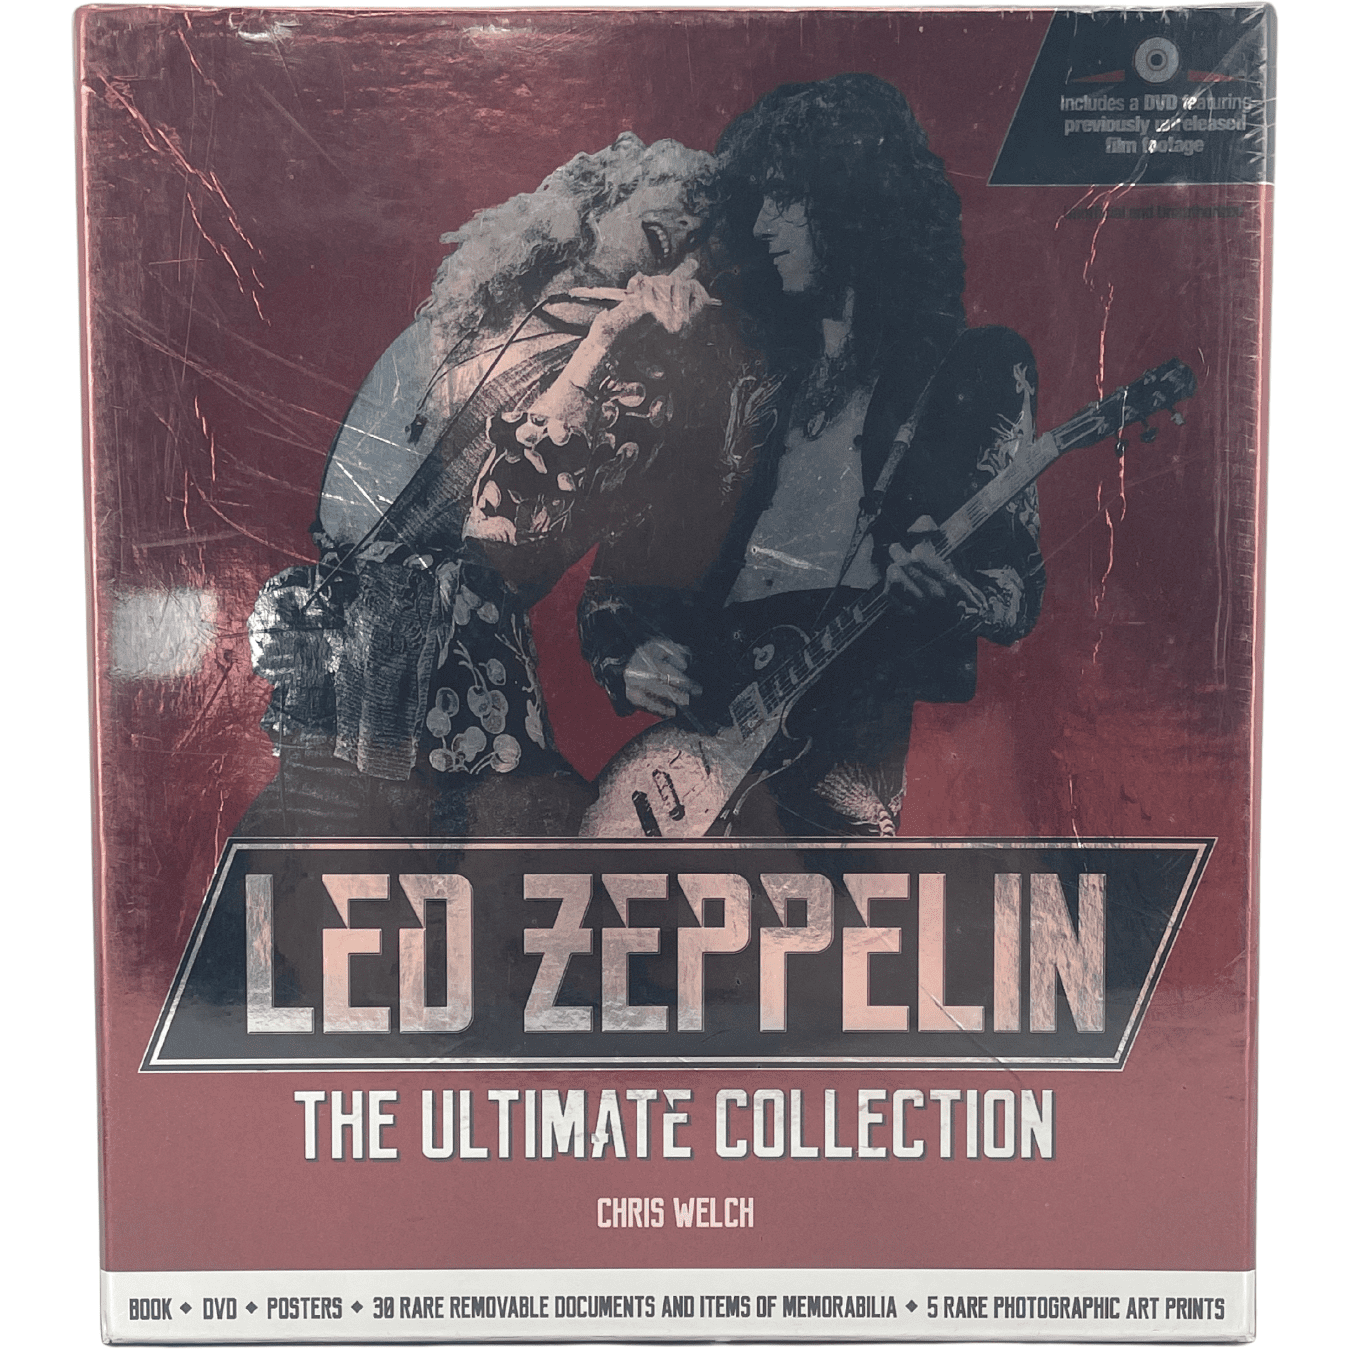 Led Zeppelin The Ultimate Collection / Rock and Roll Band / Memorabilia Set